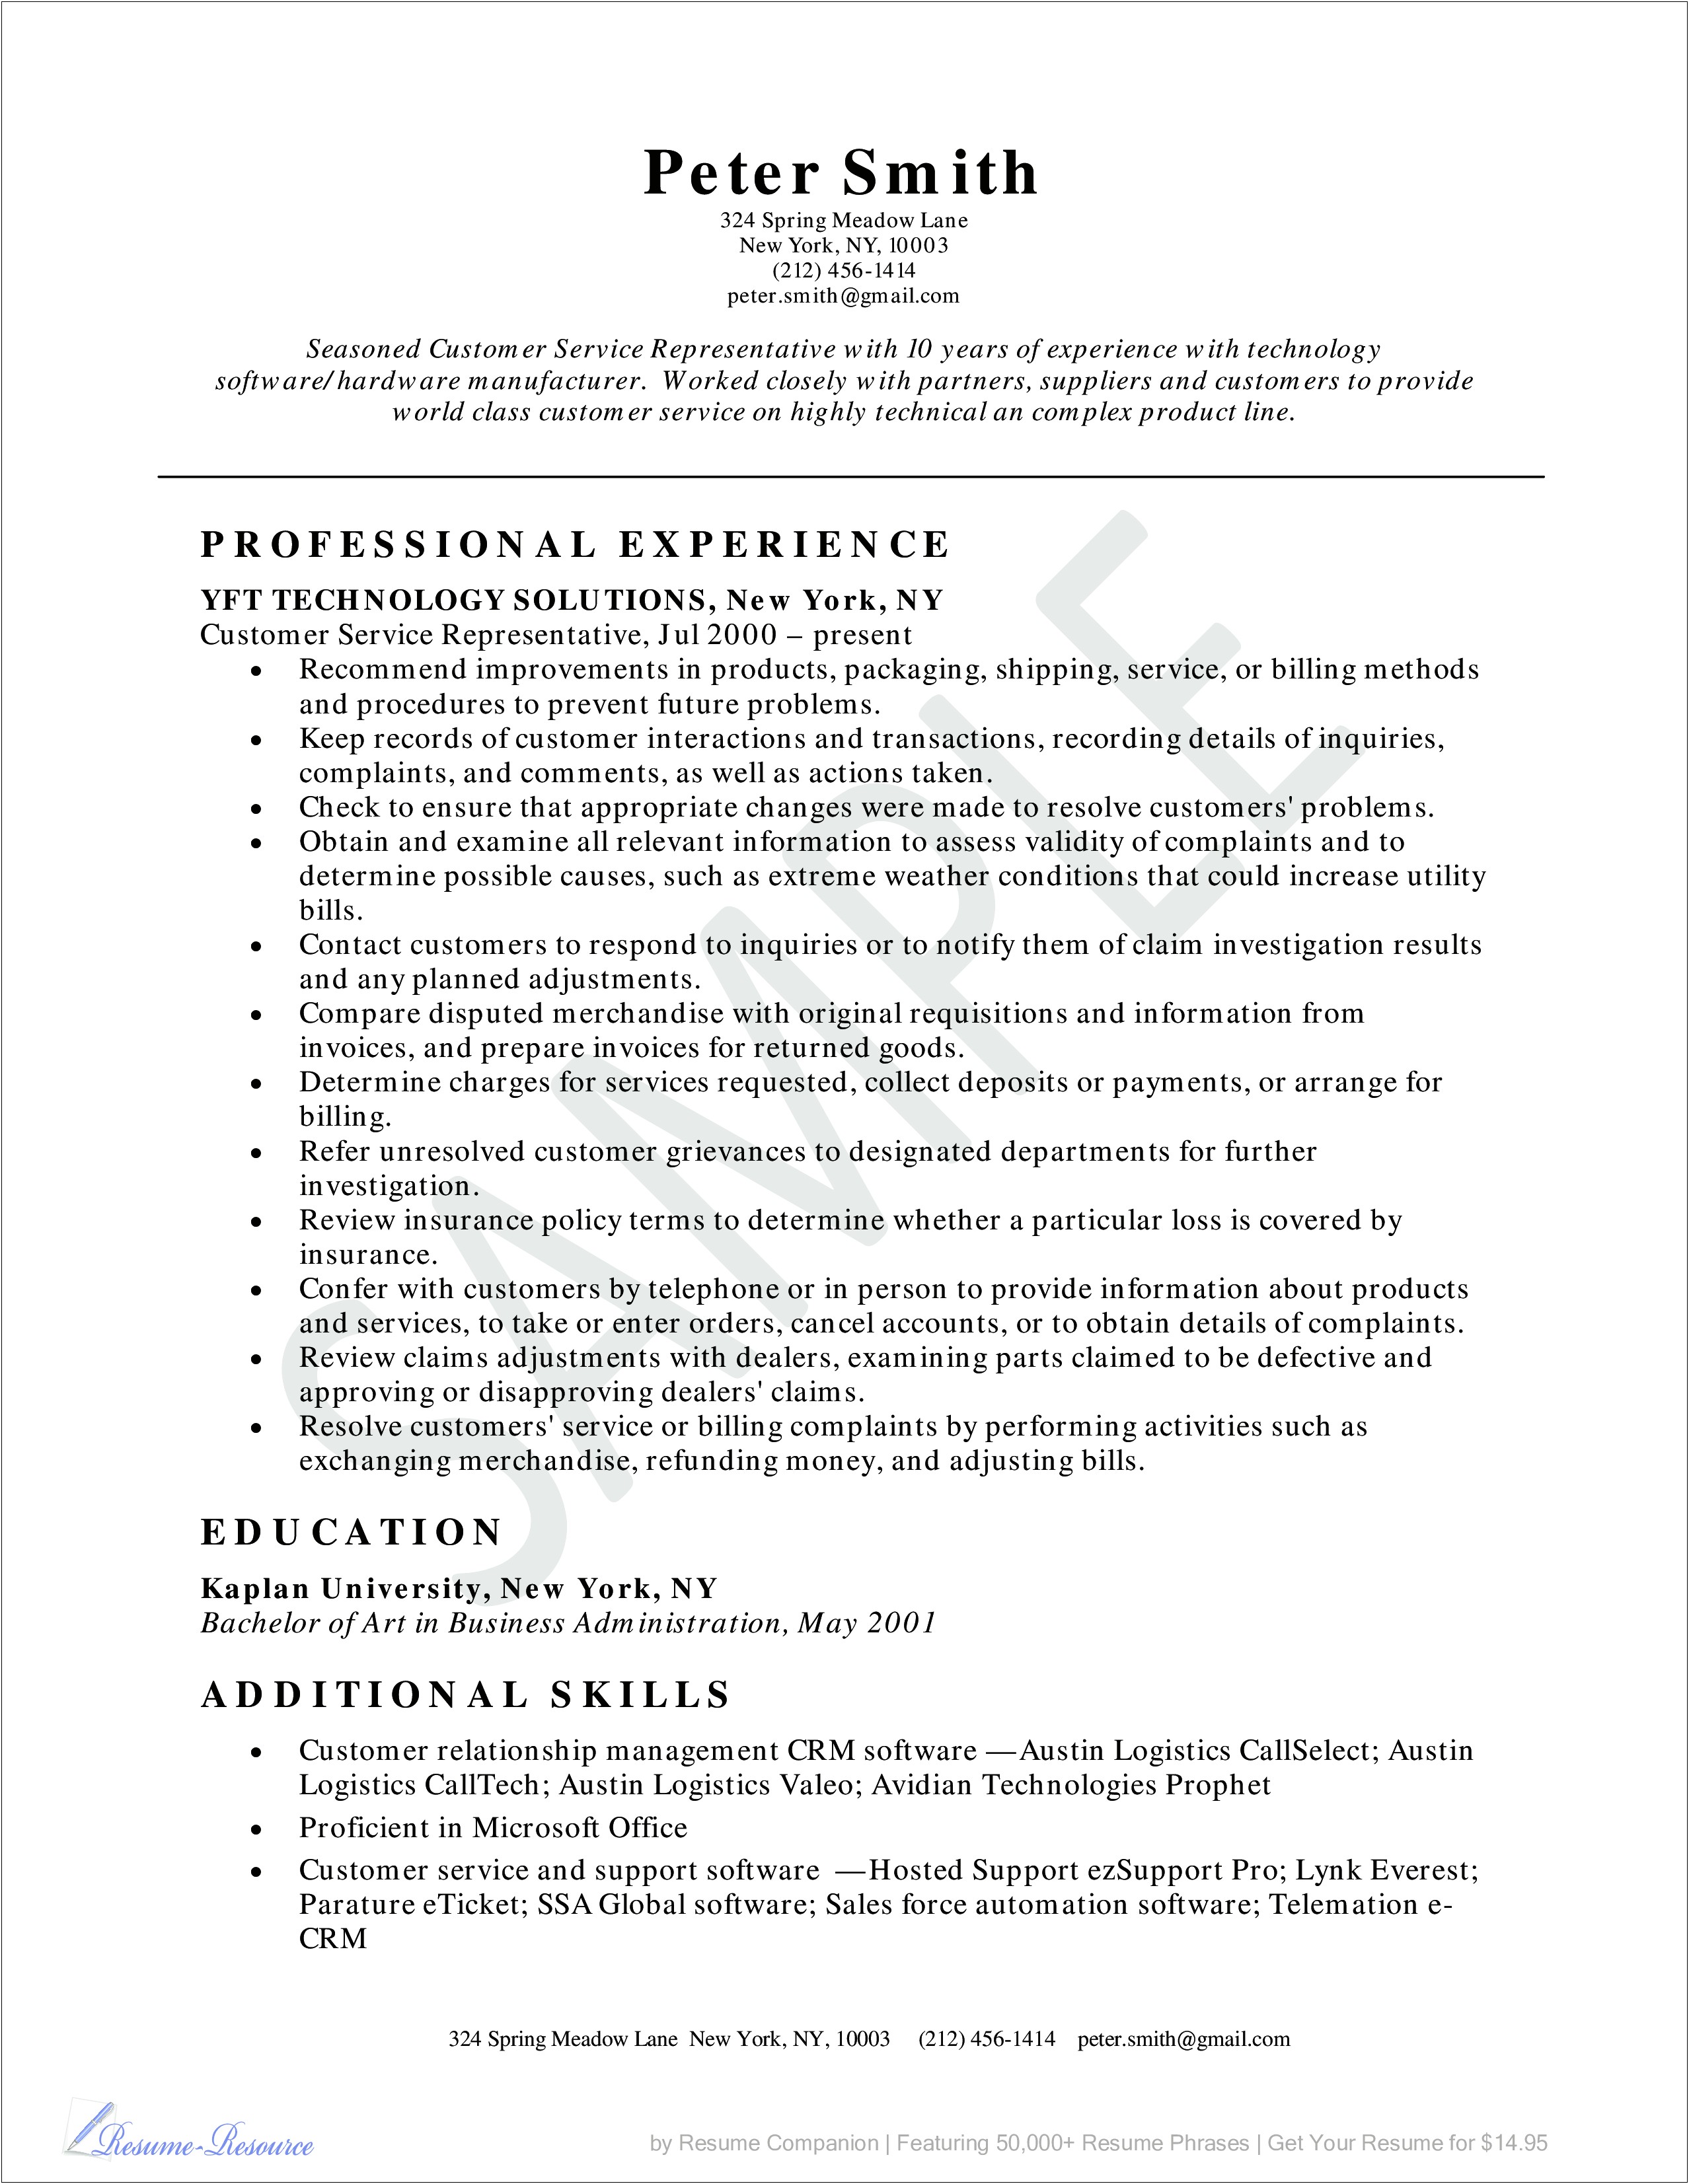 Resume Profile Examples Sales Customer Service